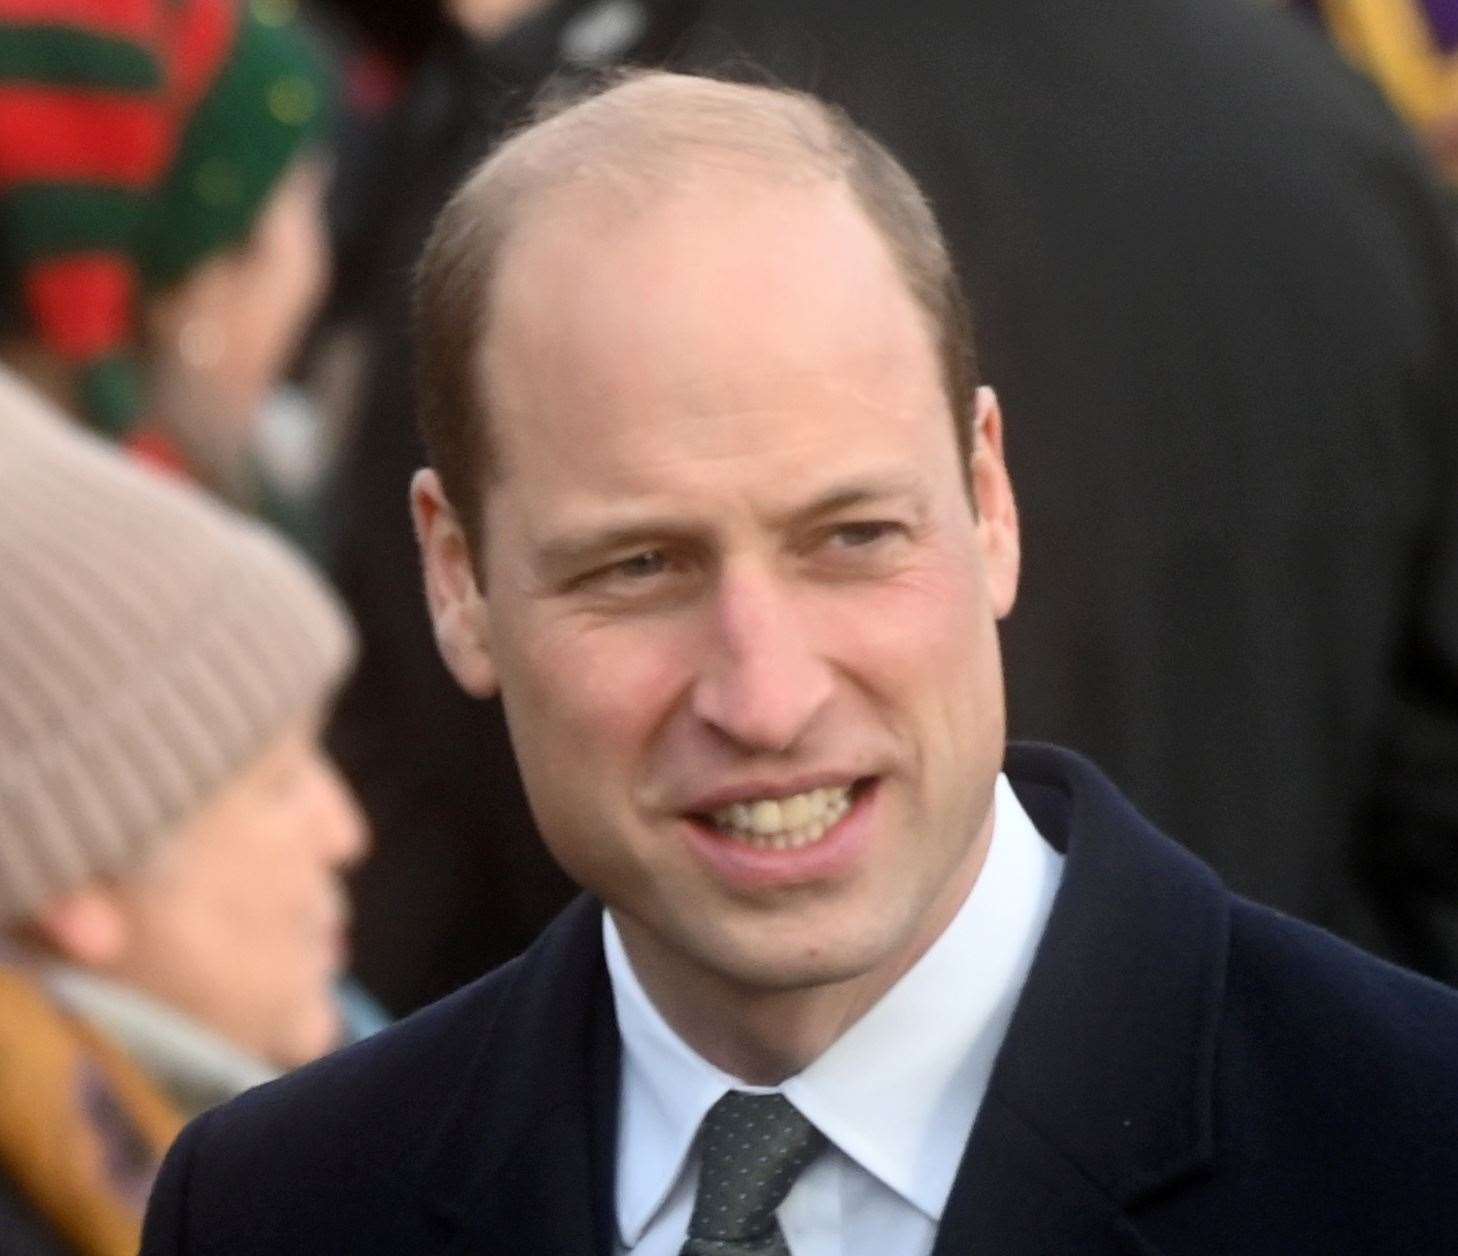 The Duchy of Cornwall is headed by Prince William